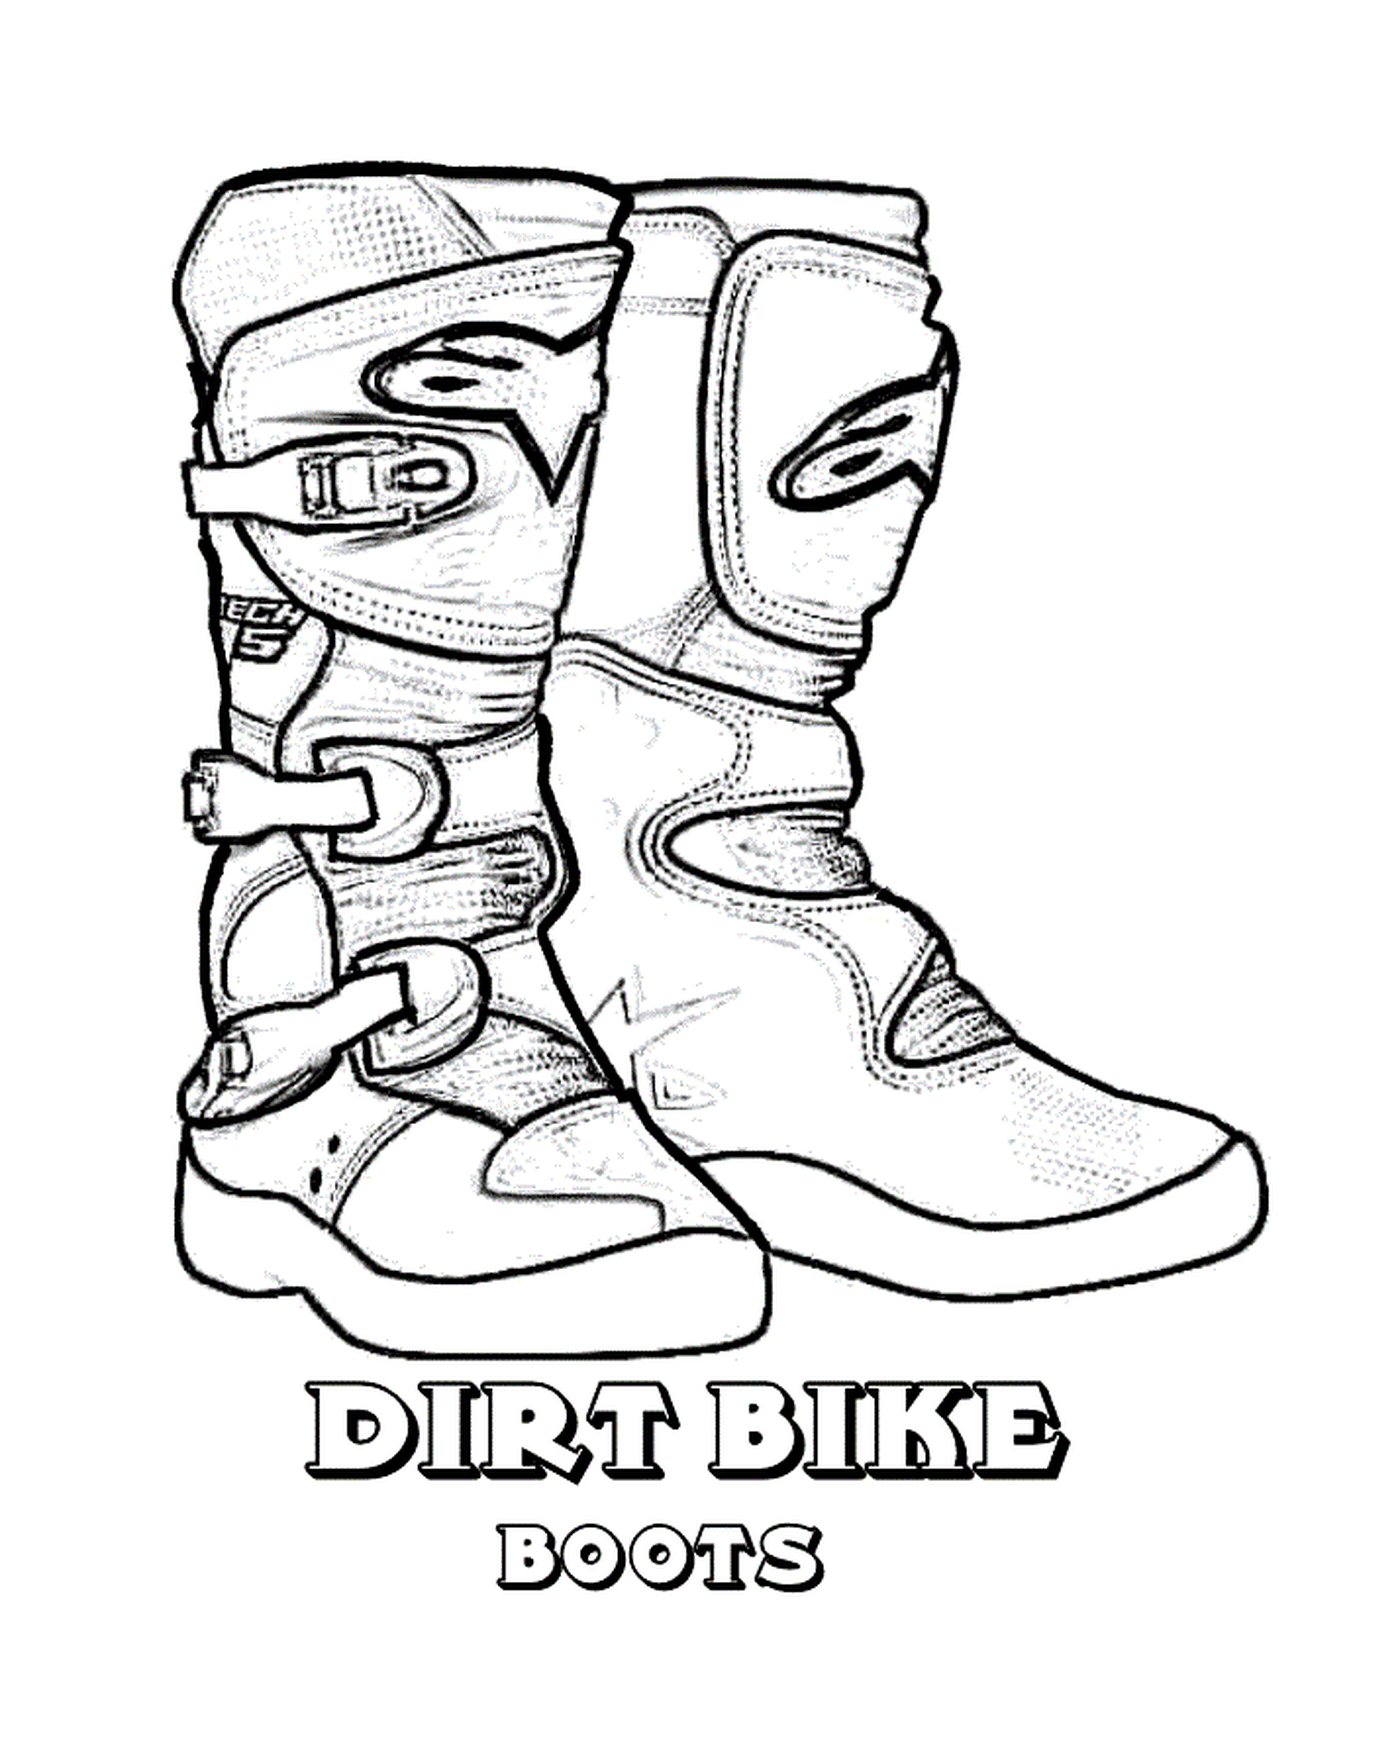  Motocross boots in drawing 